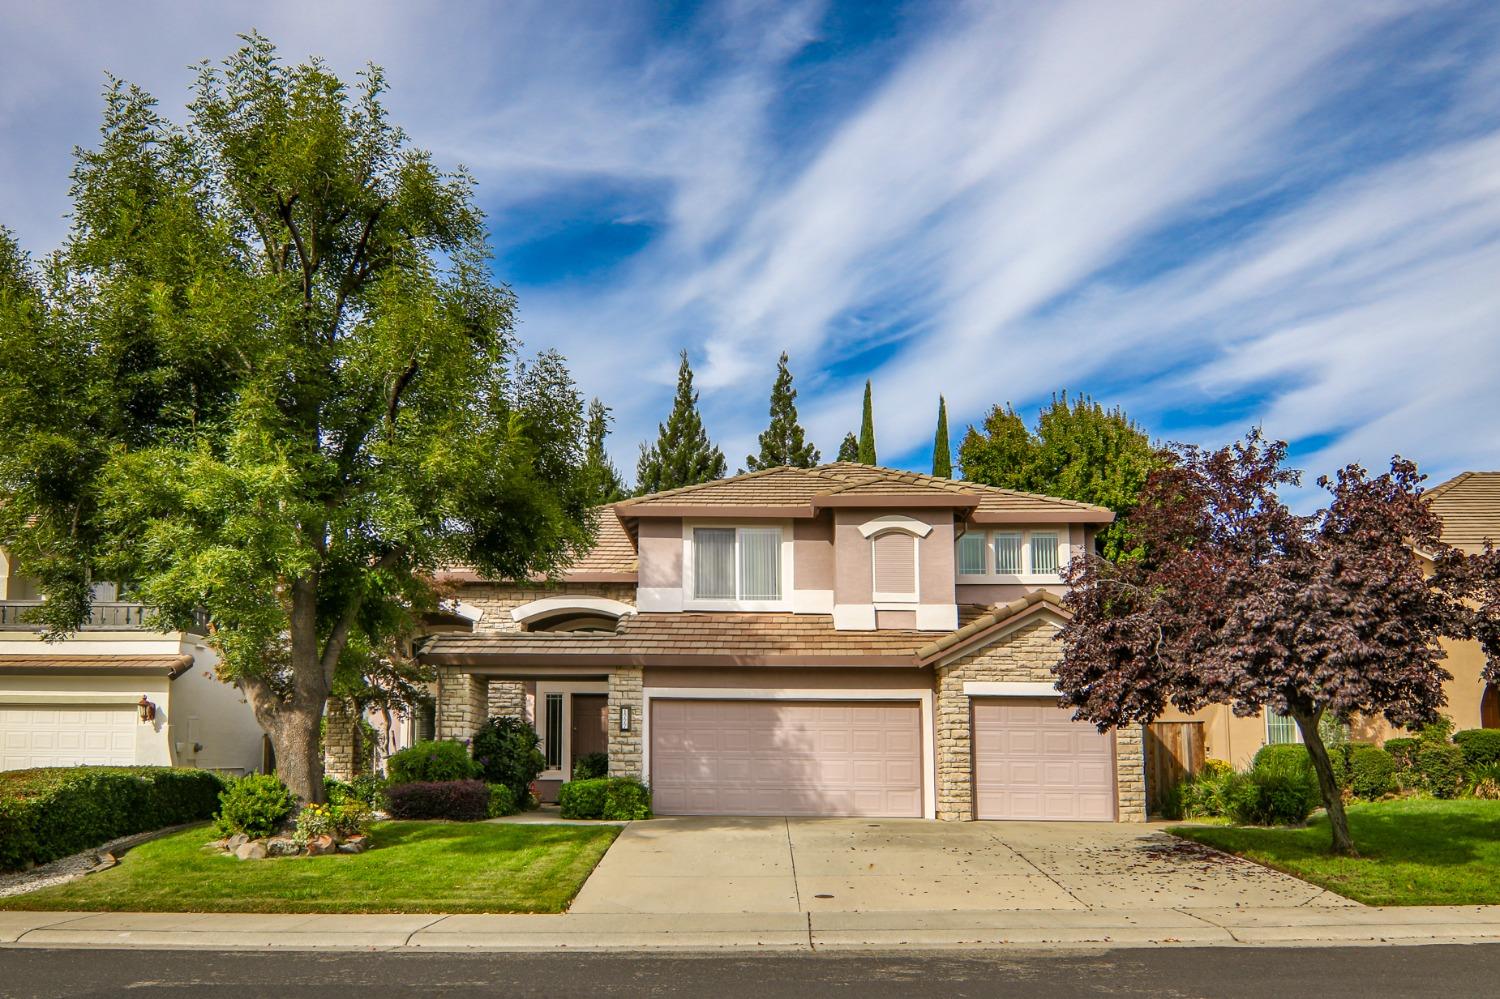 Photo of 1777 Orvietto Dr in Roseville, CA